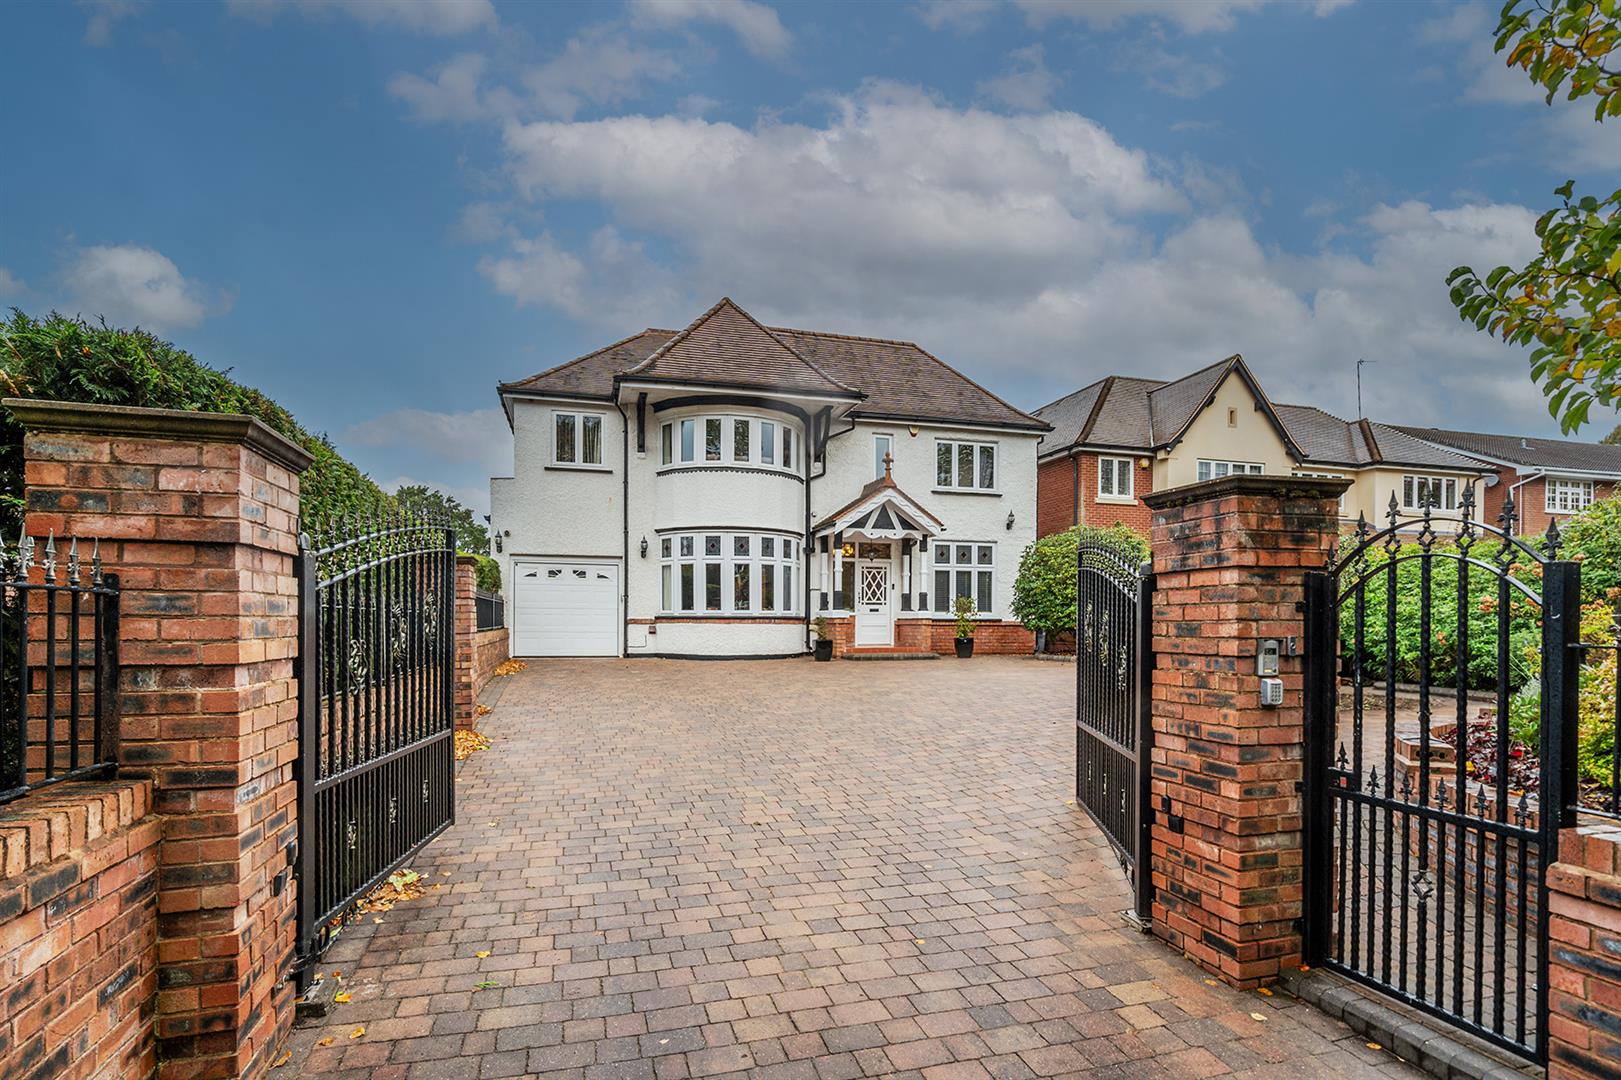 6 bed detached house for sale in Alderbrook Road, Solihull  - Property Image 1